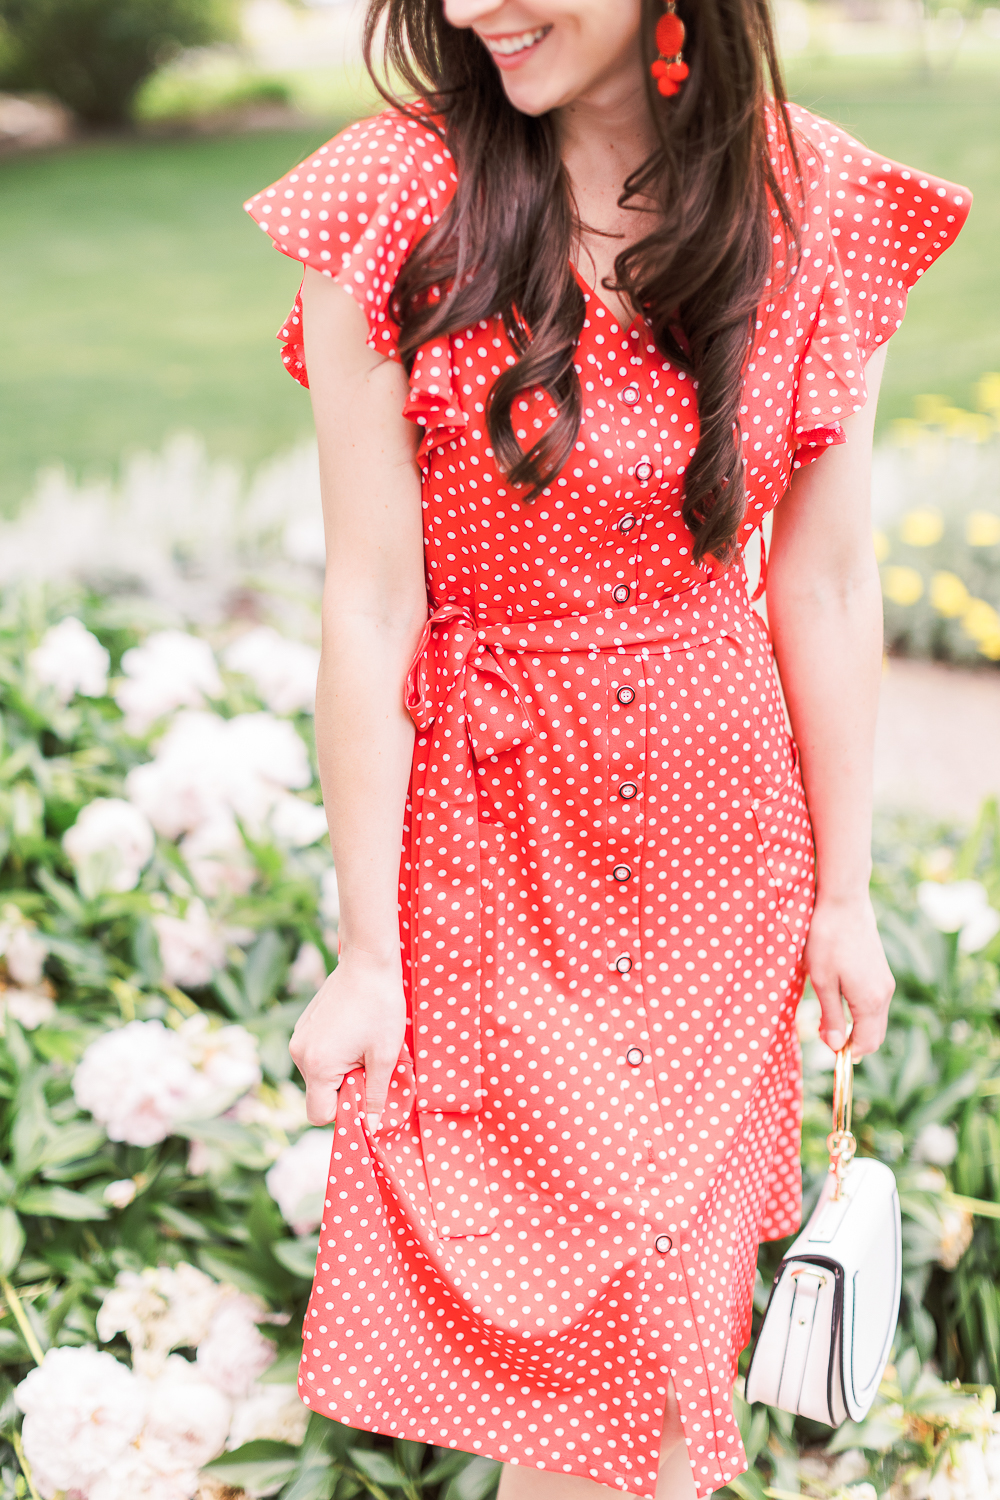 4th of July Outfit Idea: Red Polka Dot Midi Dress Outfit by popular affordable style blogger Stephanie Ziajka on Diary of a Debutante, MITILLY Polka Dot Sleeveless V Neck Swing Midi Dress with Pockets, white Chloe Nile dupe bag, A New Day Women's Adelina Espadrilles Slide Sandals